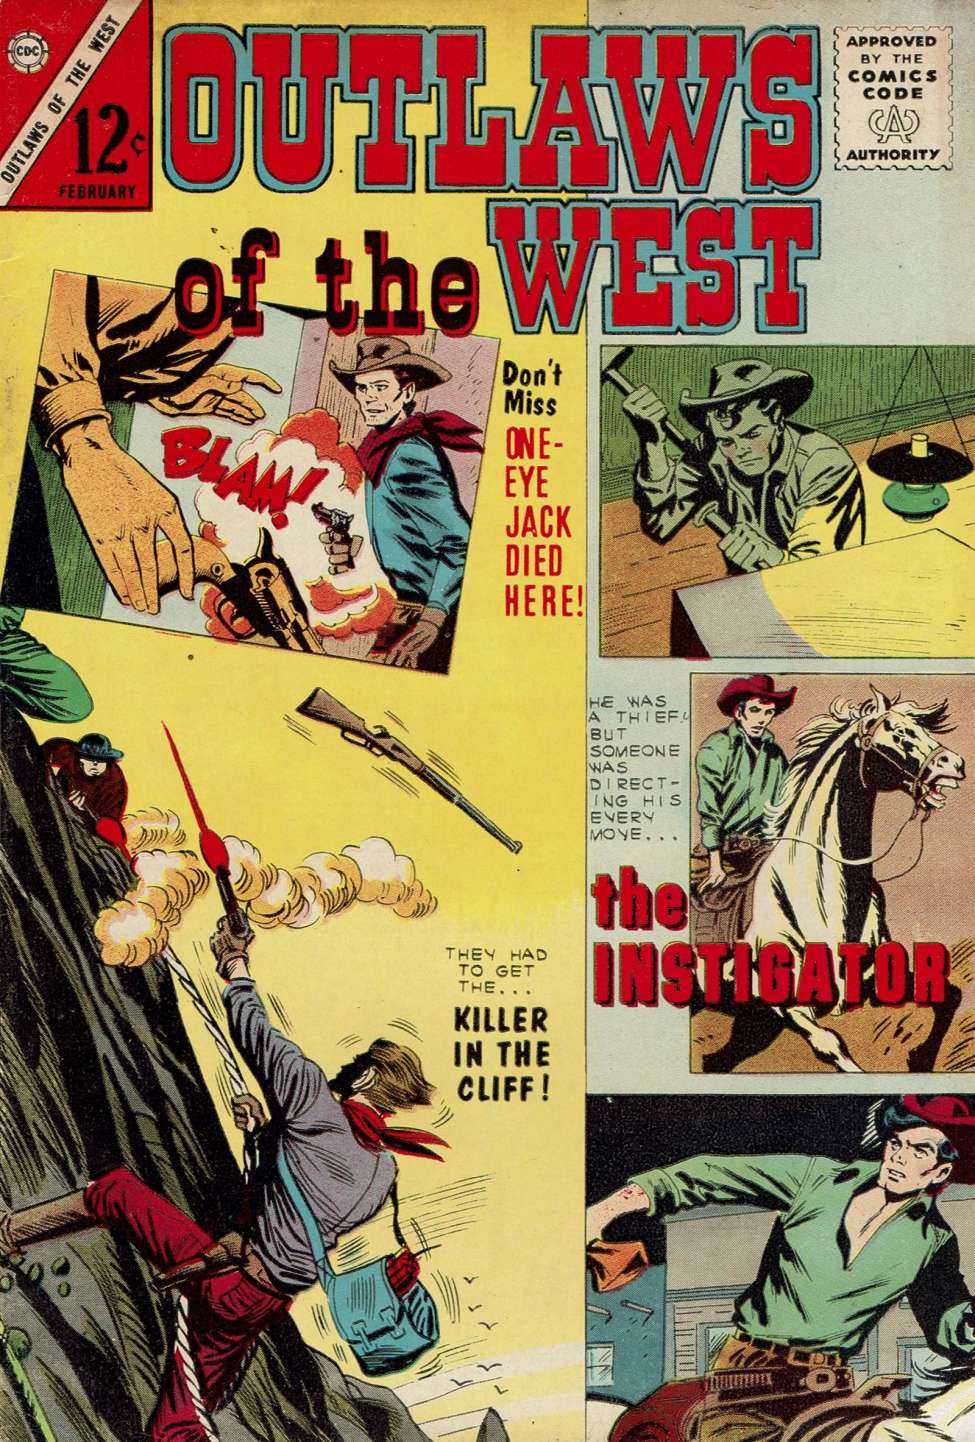 Book Cover For Outlaws of the West 41